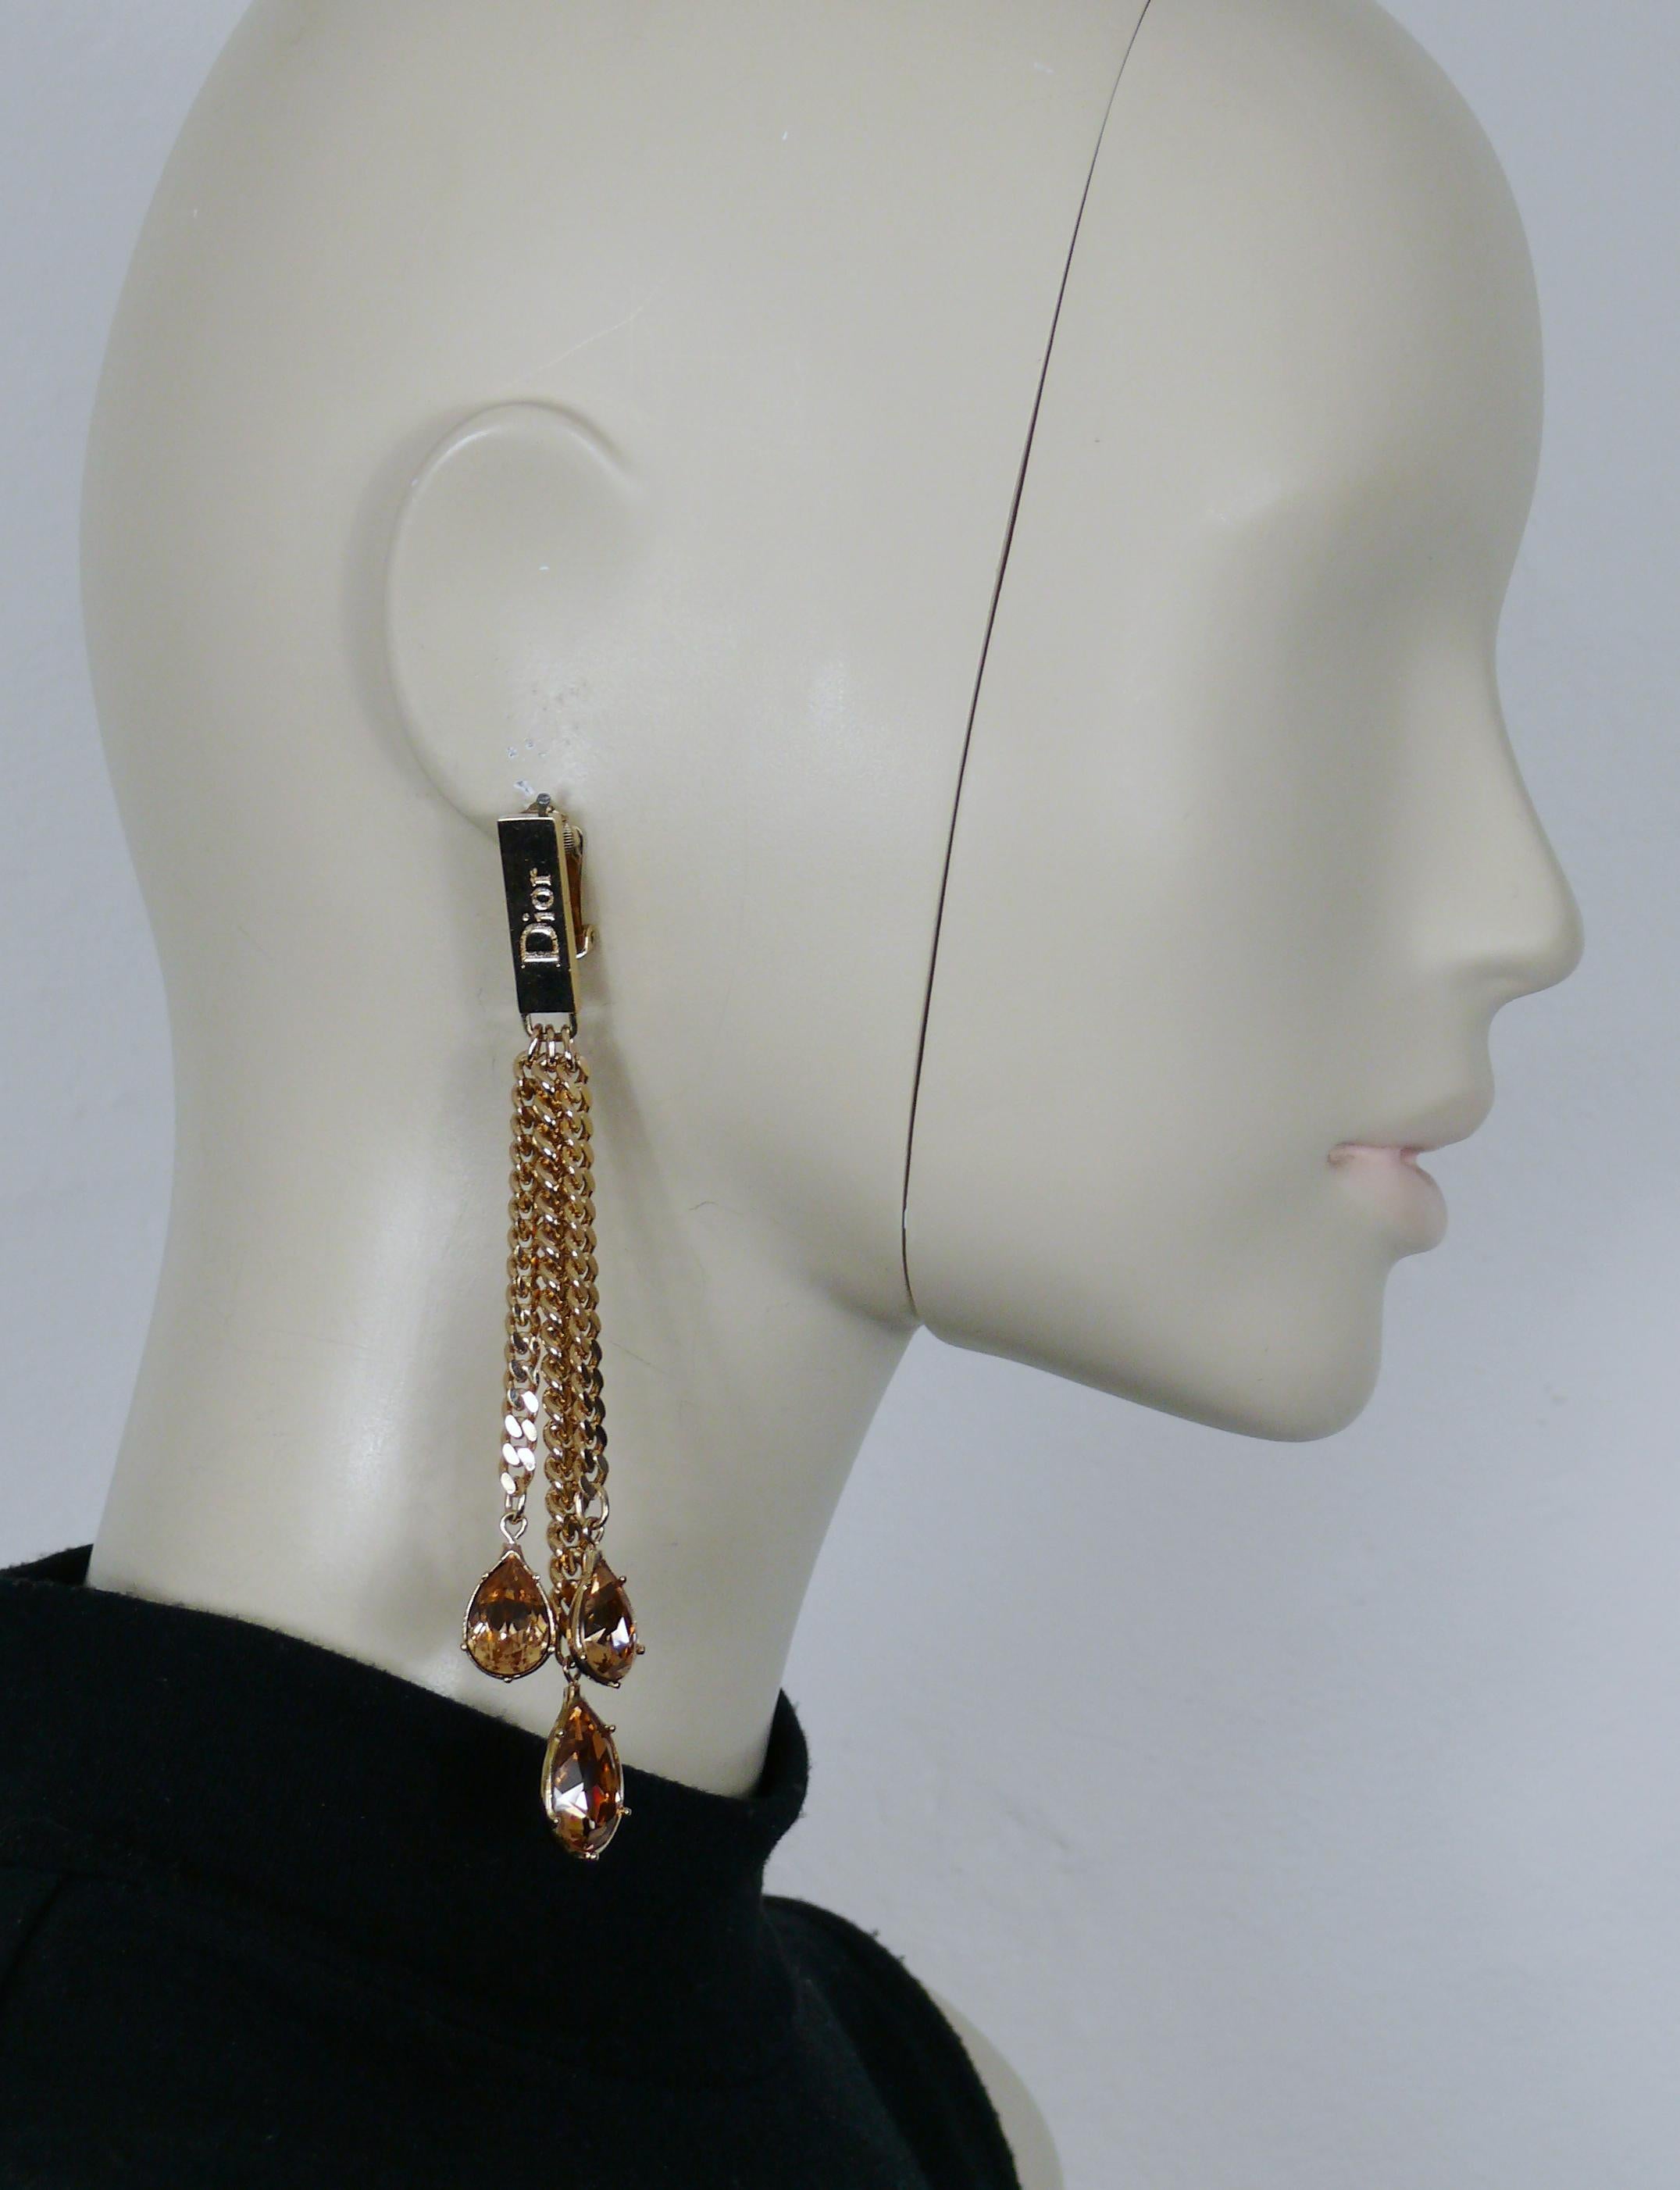 CHRISTIAN DIOR by JOHN GALLIANO dangling earrings (clip-on) featuring three chains embellished with pear-shaped crystals in amber color.

Color of the metal is, to our opinion, a shade of antique gold.

Embossed DIOR.

Indicative measurements : max.